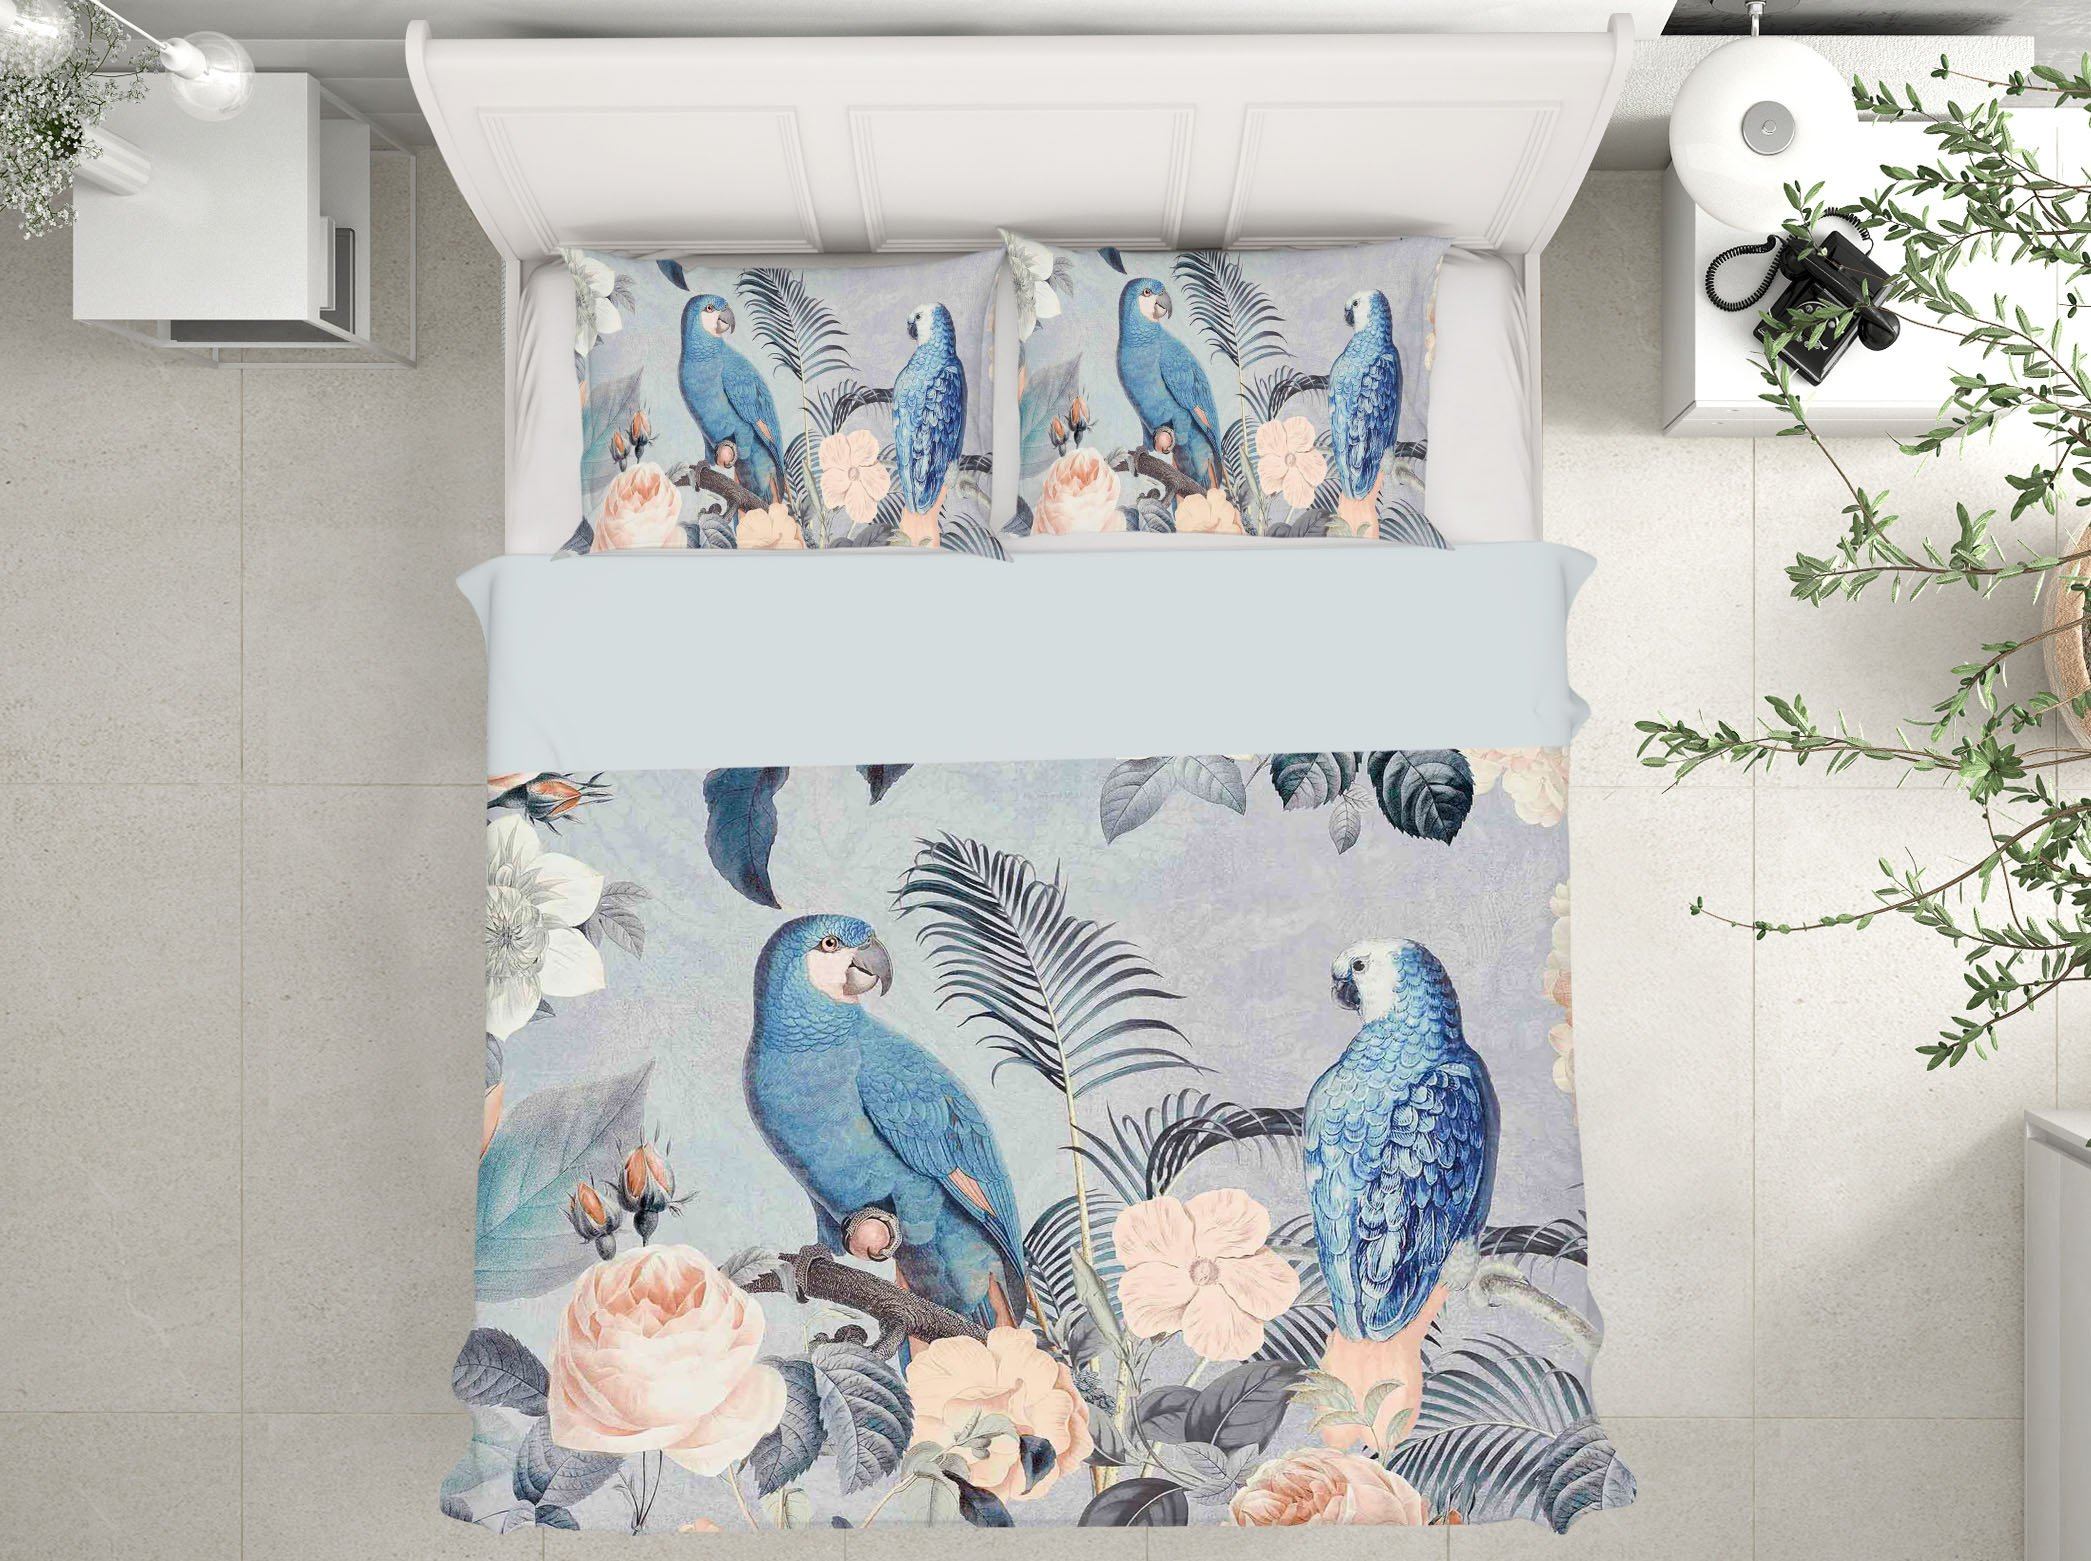 3D Bird Family 2129 Andrea haase Bedding Bed Pillowcases Quilt Quiet Covers AJ Creativity Home 